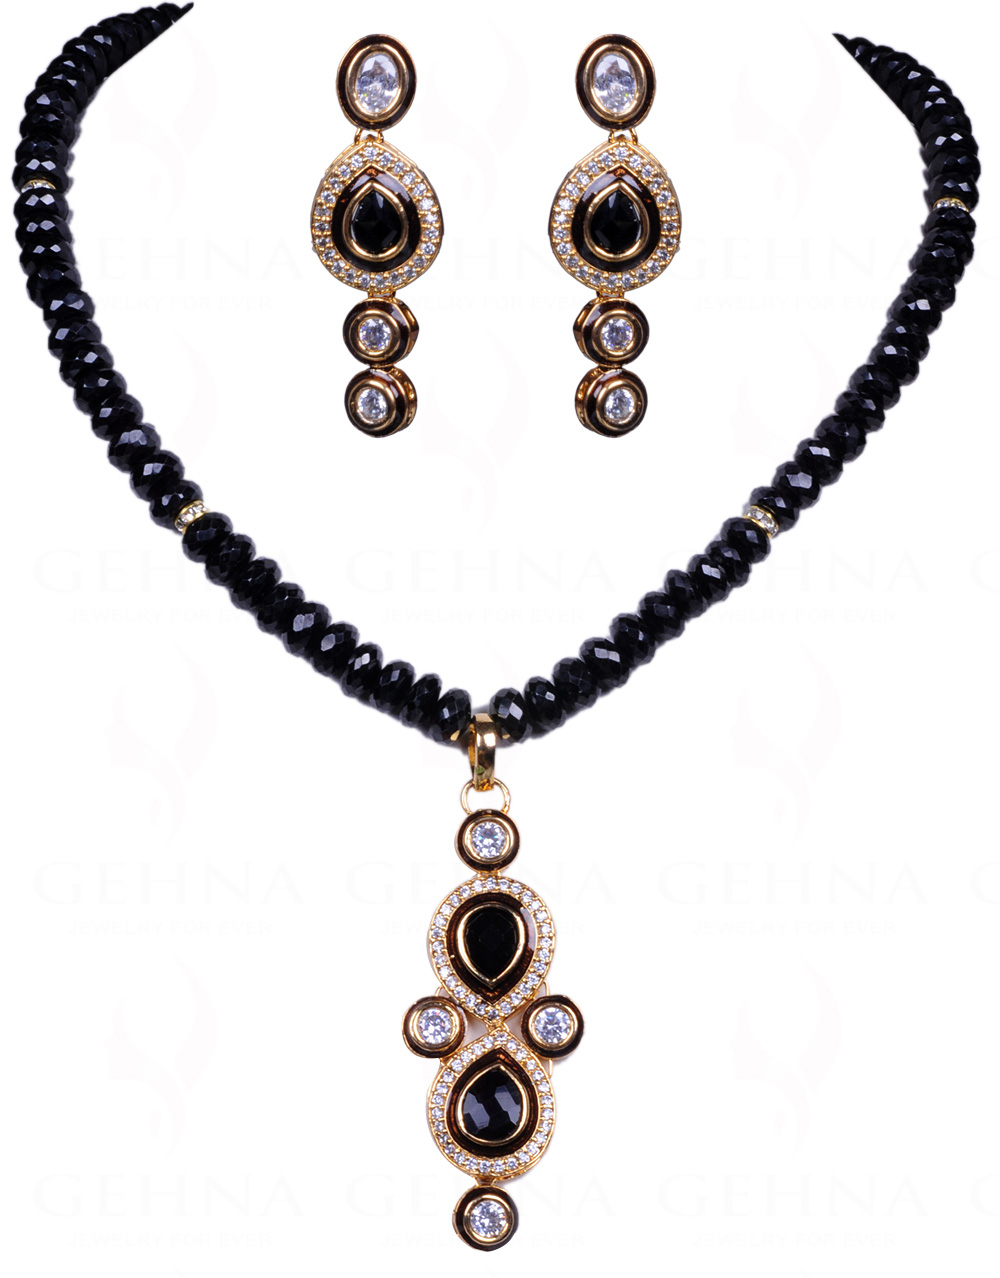 Natural Black Spinel Faceted Bead With Black Onyx Studded Pendant Set FN-1006